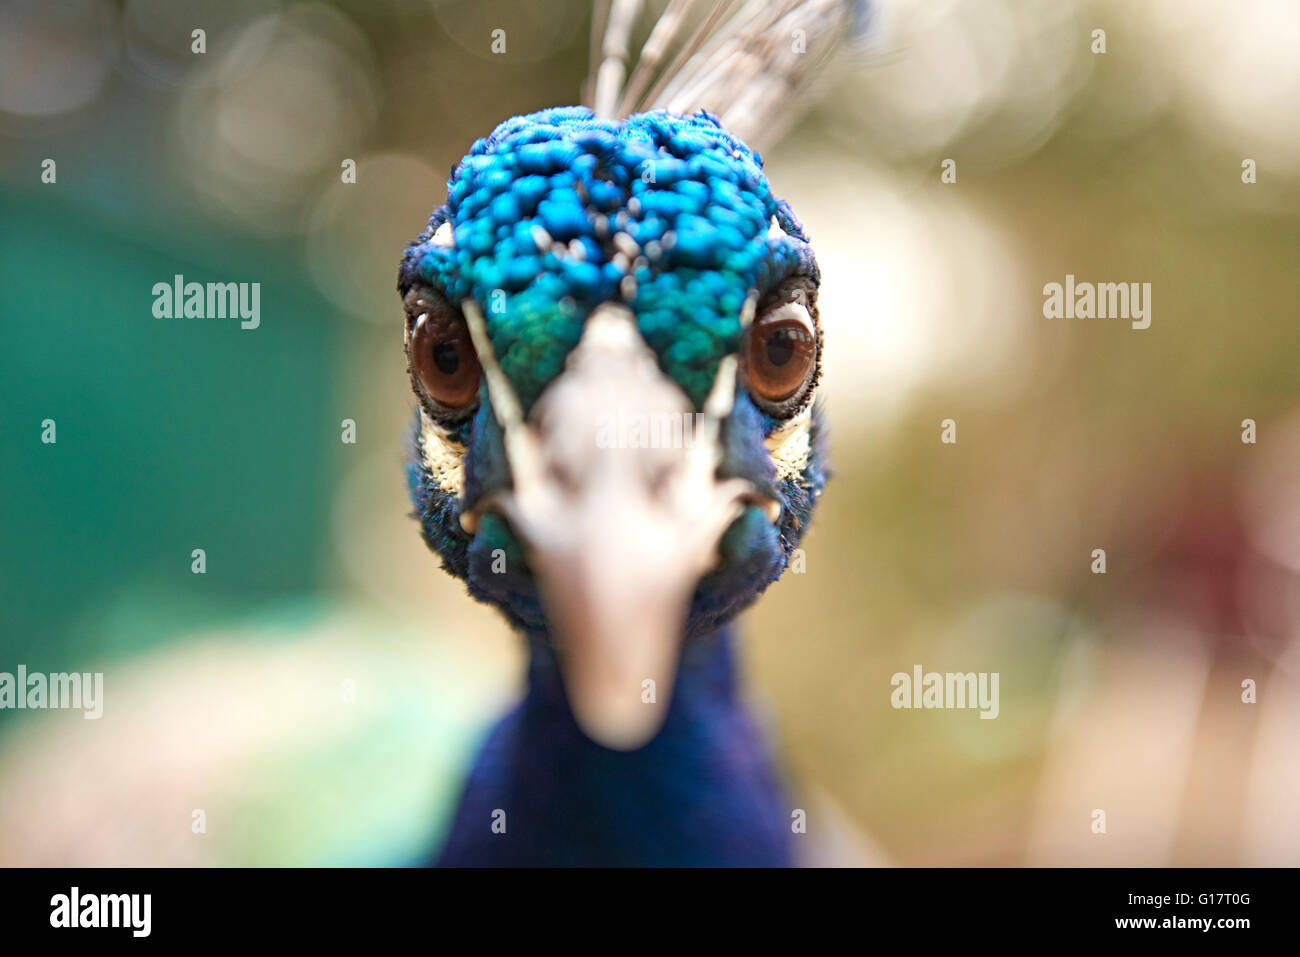 Close up portrait of staring blue peacock Banque D'Images